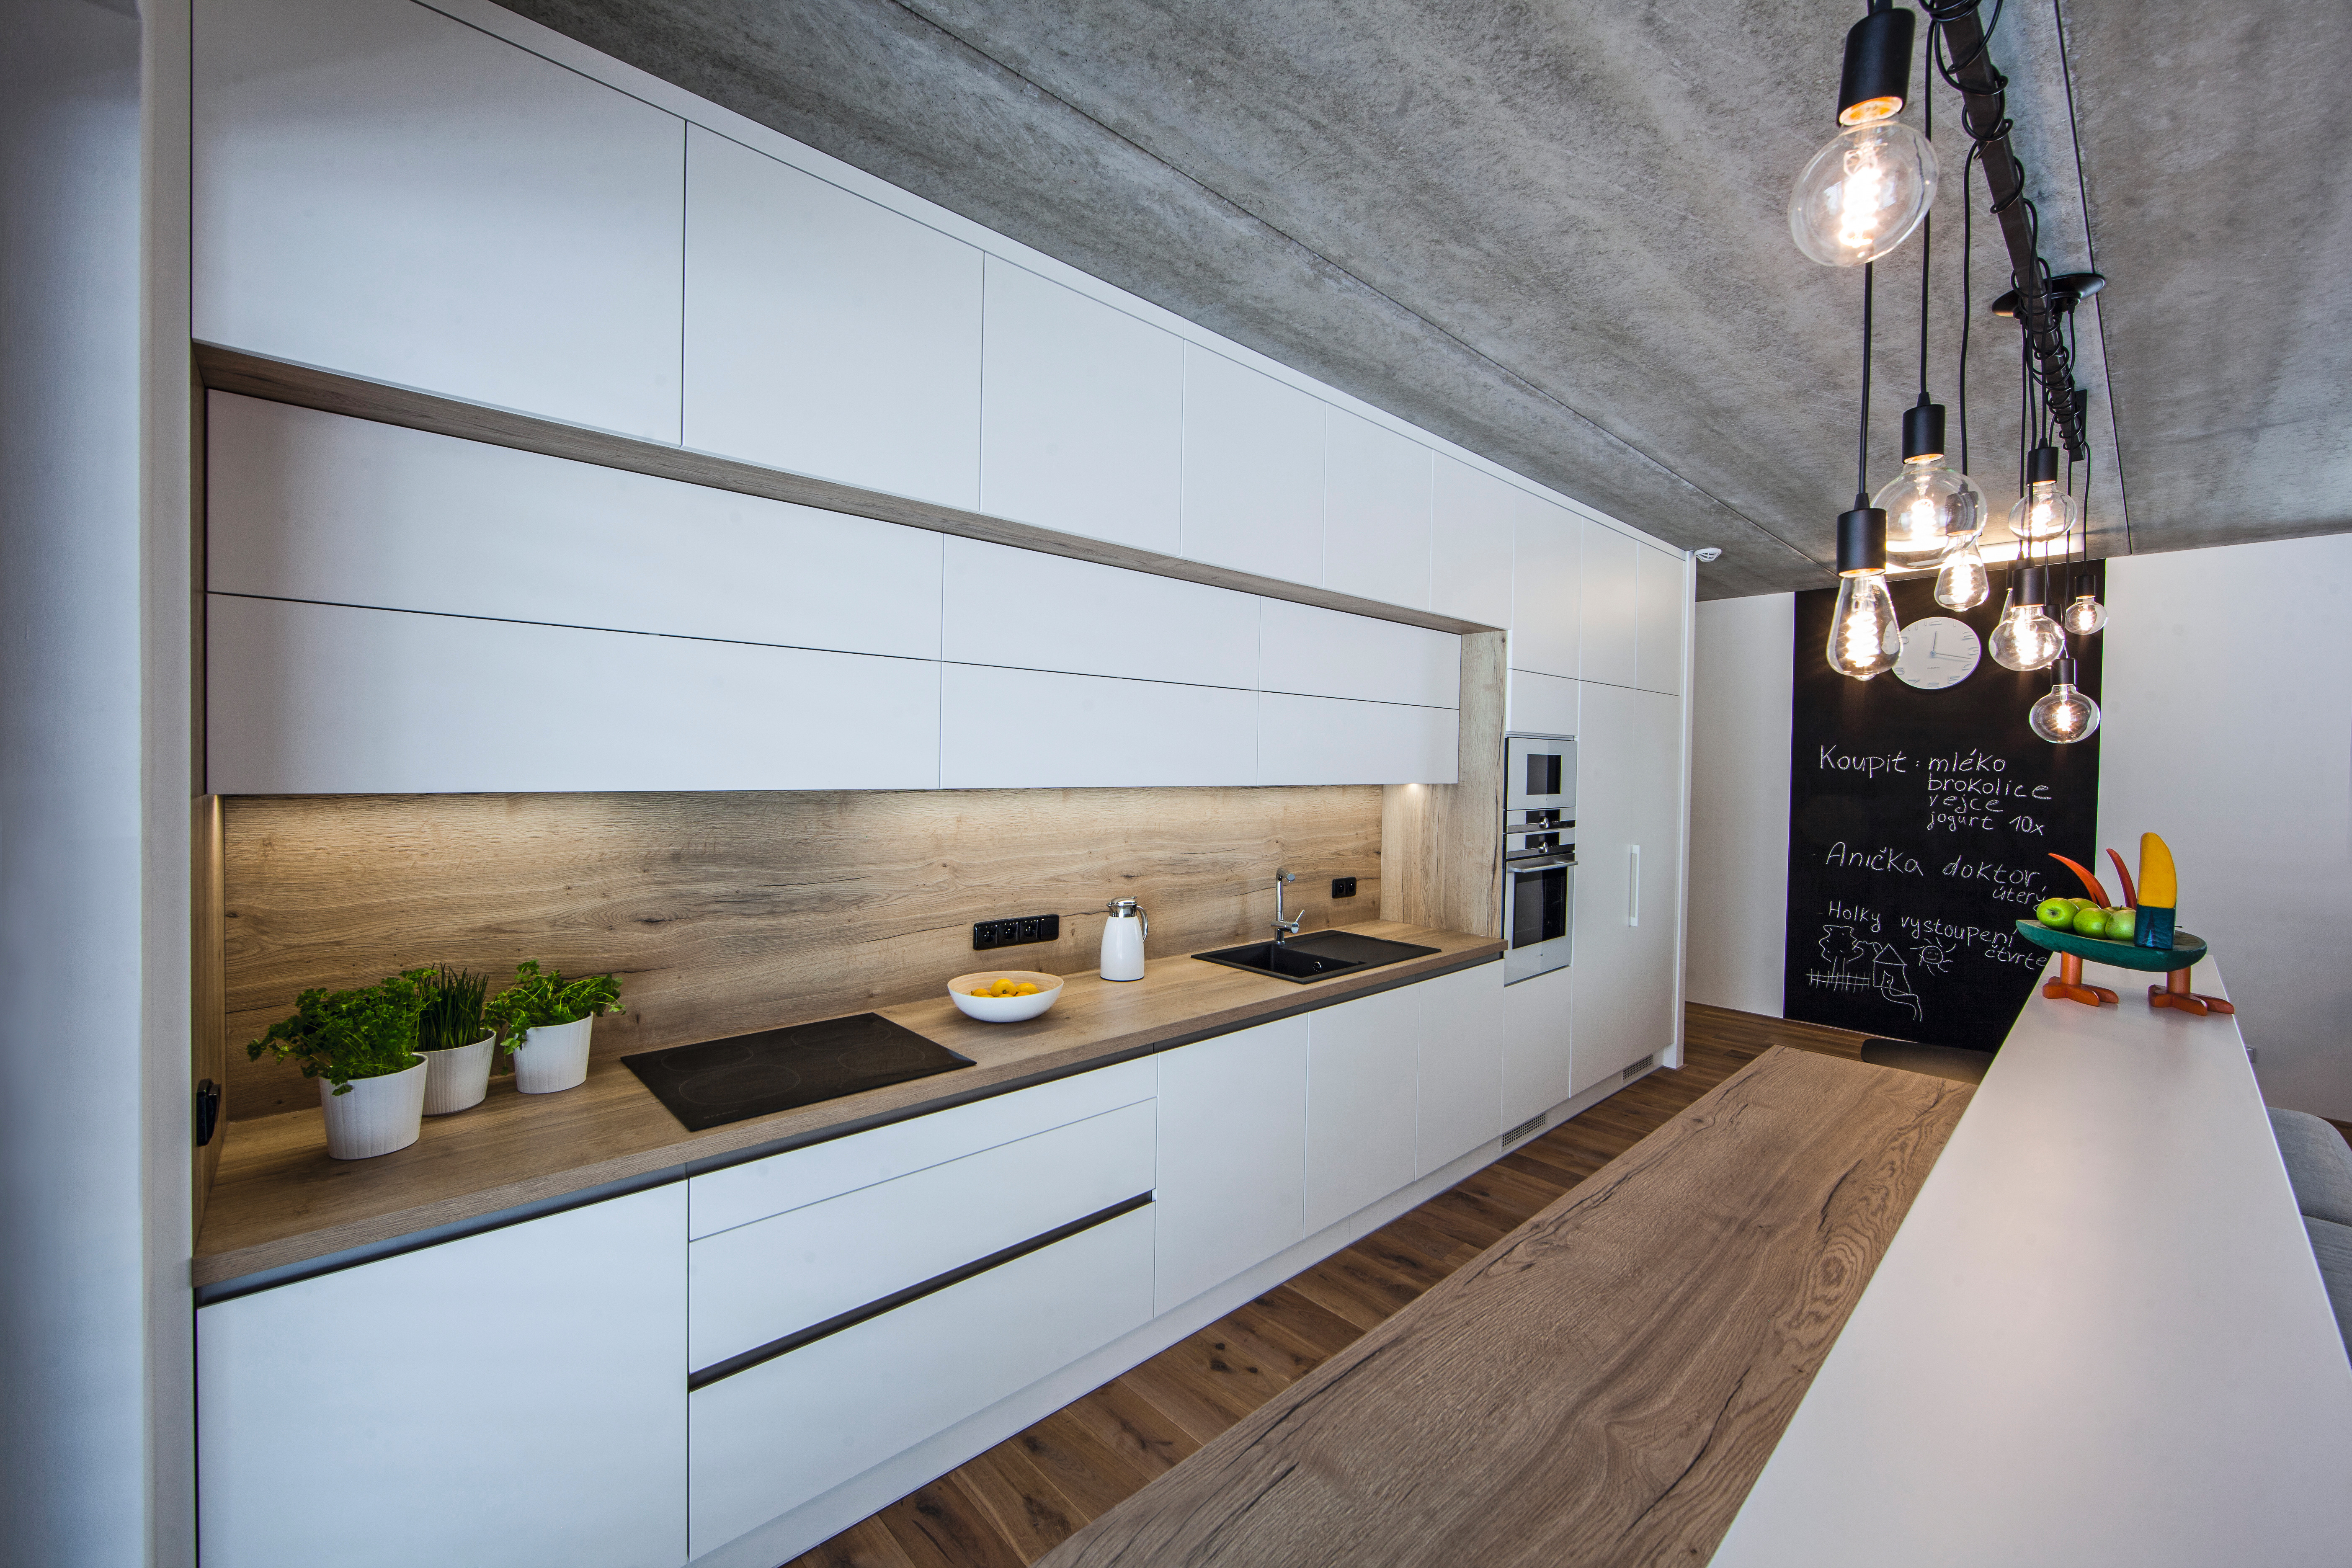 The oak decor creates an attractive contrast to the white in the modern kitchen rendered in a clean, minimalist style.